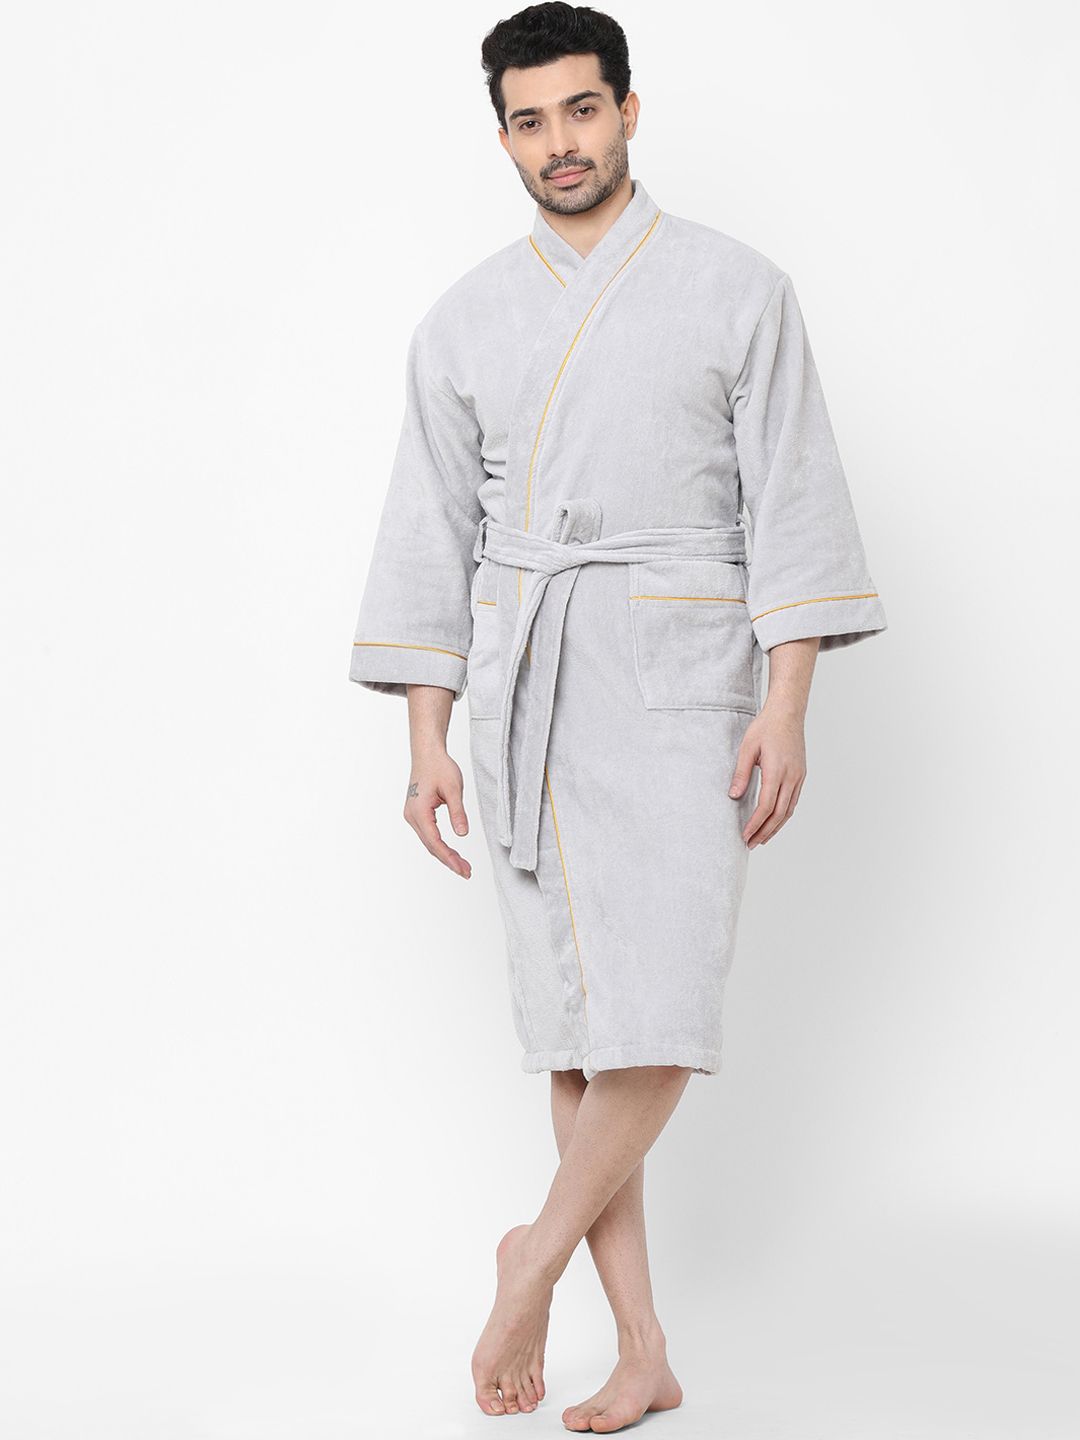 SPACES Silver Solid Pure Cotton 380 GSM Quick Dry Ultra Soft Bath Robe (Extra Large) Price in India